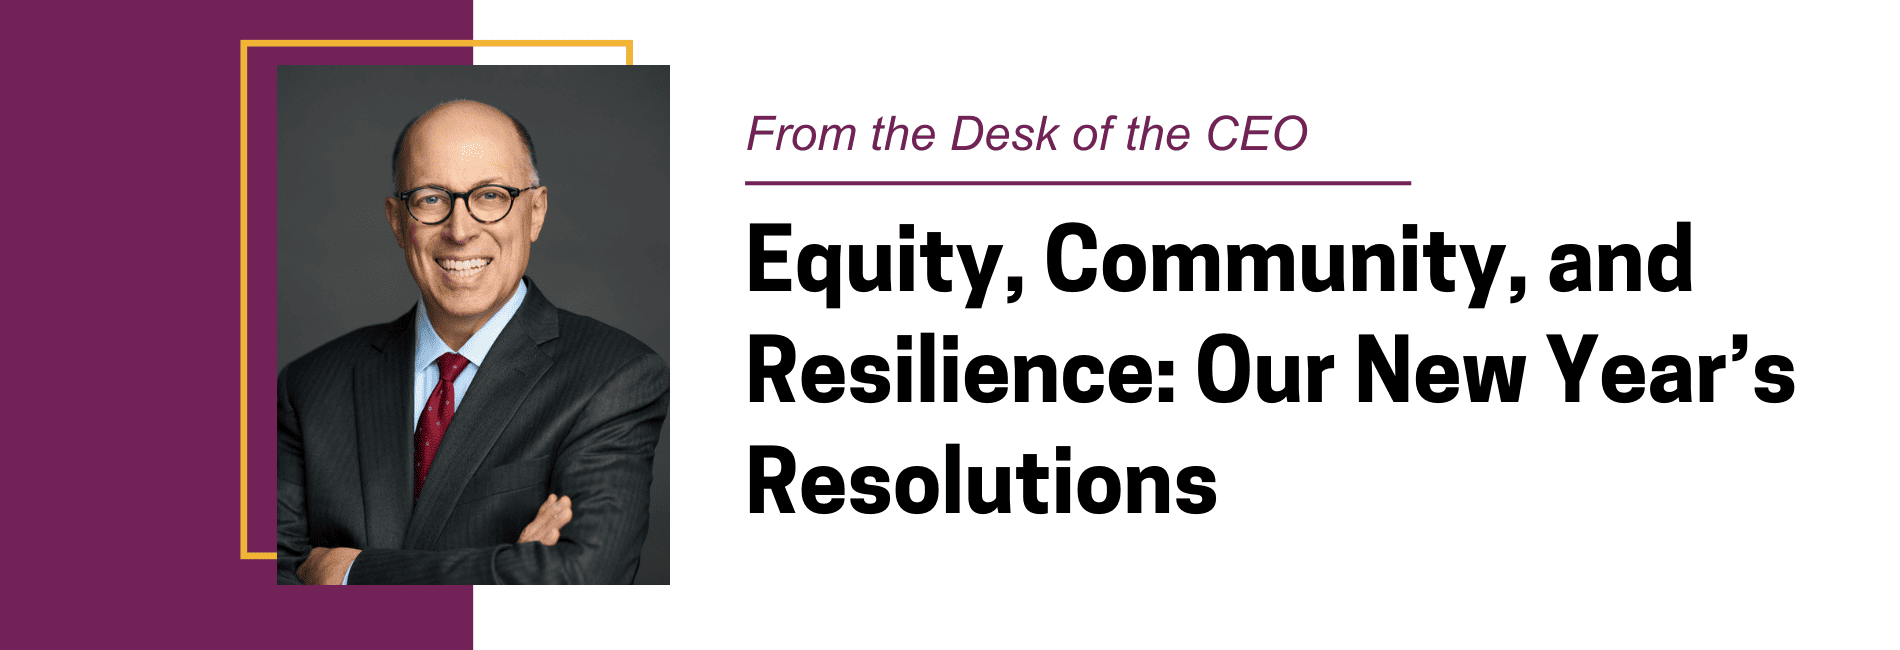 From the Desk of the CEO: New Year's Resolutions